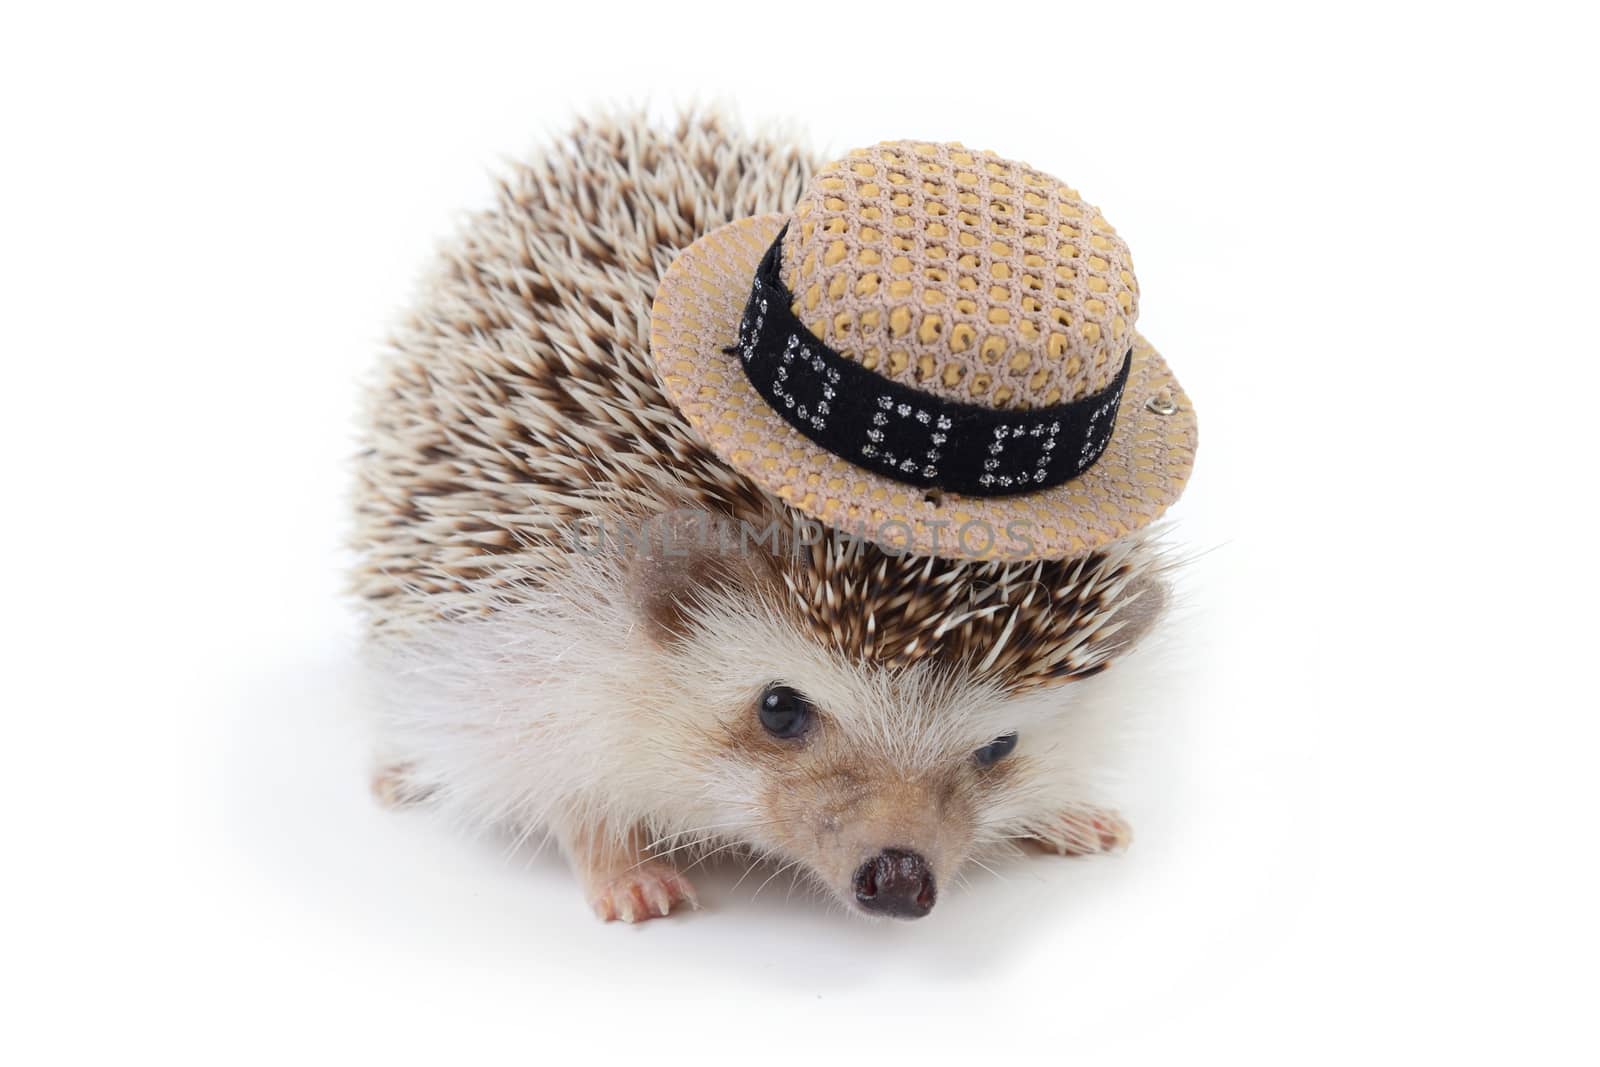 Little hedghog with samll hat. by pandpstock_002